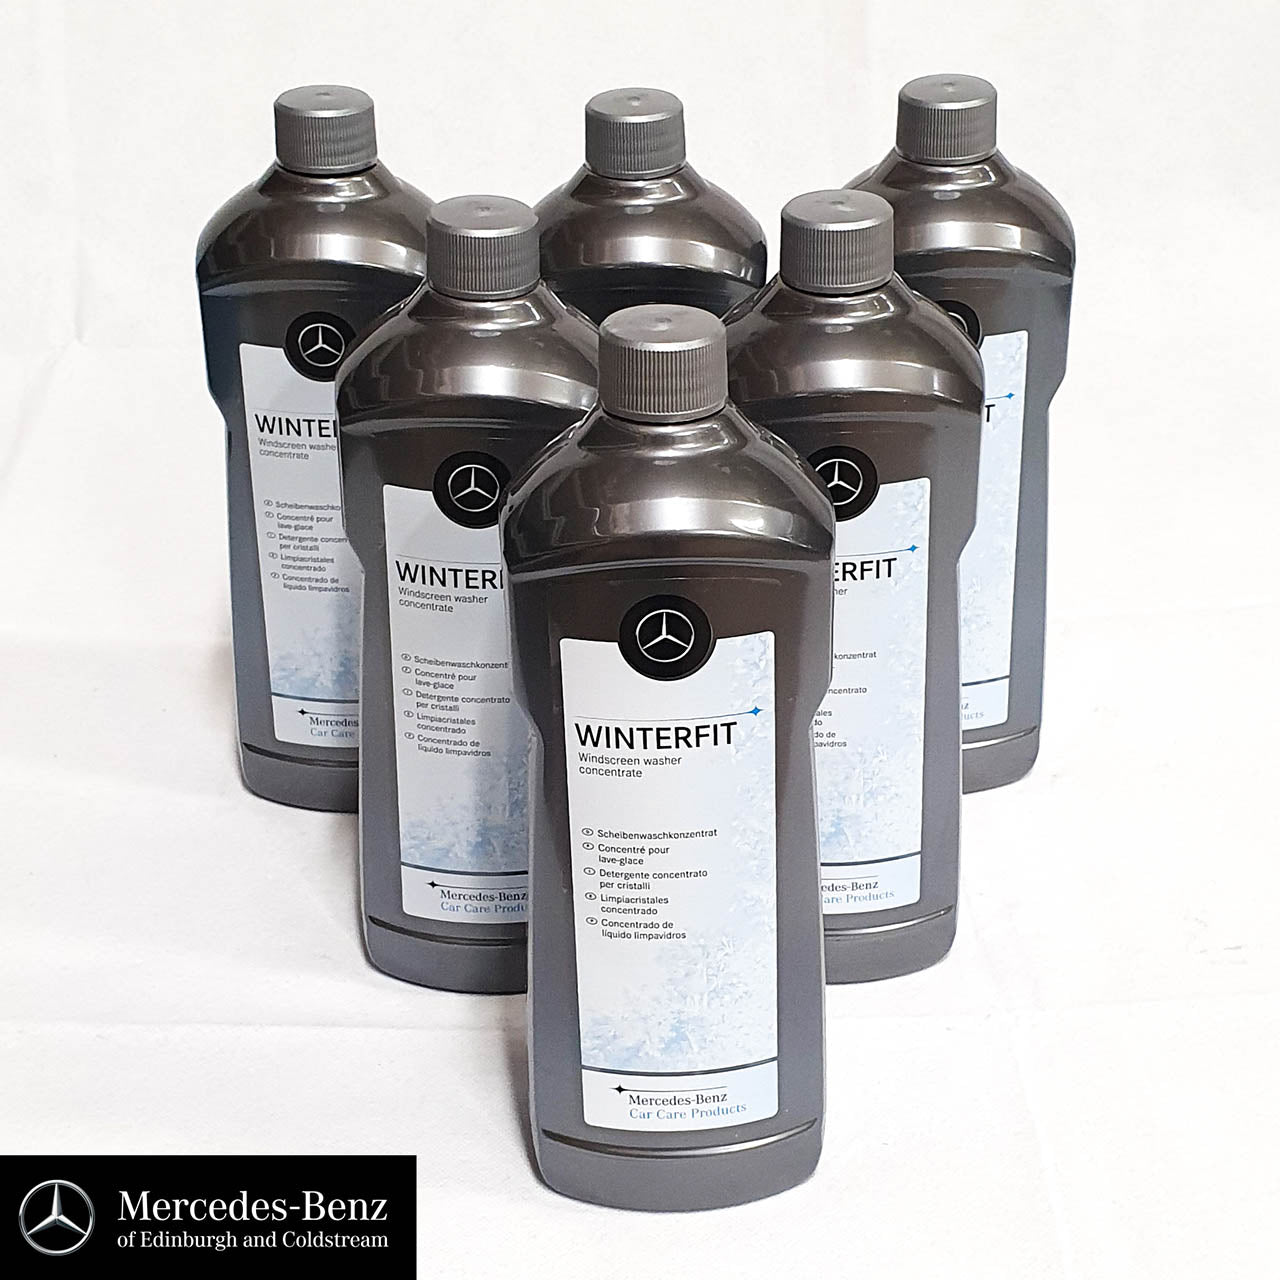 Genuine Mercedes-Benz concentrated screen wash fluid WinterFit up to -29C